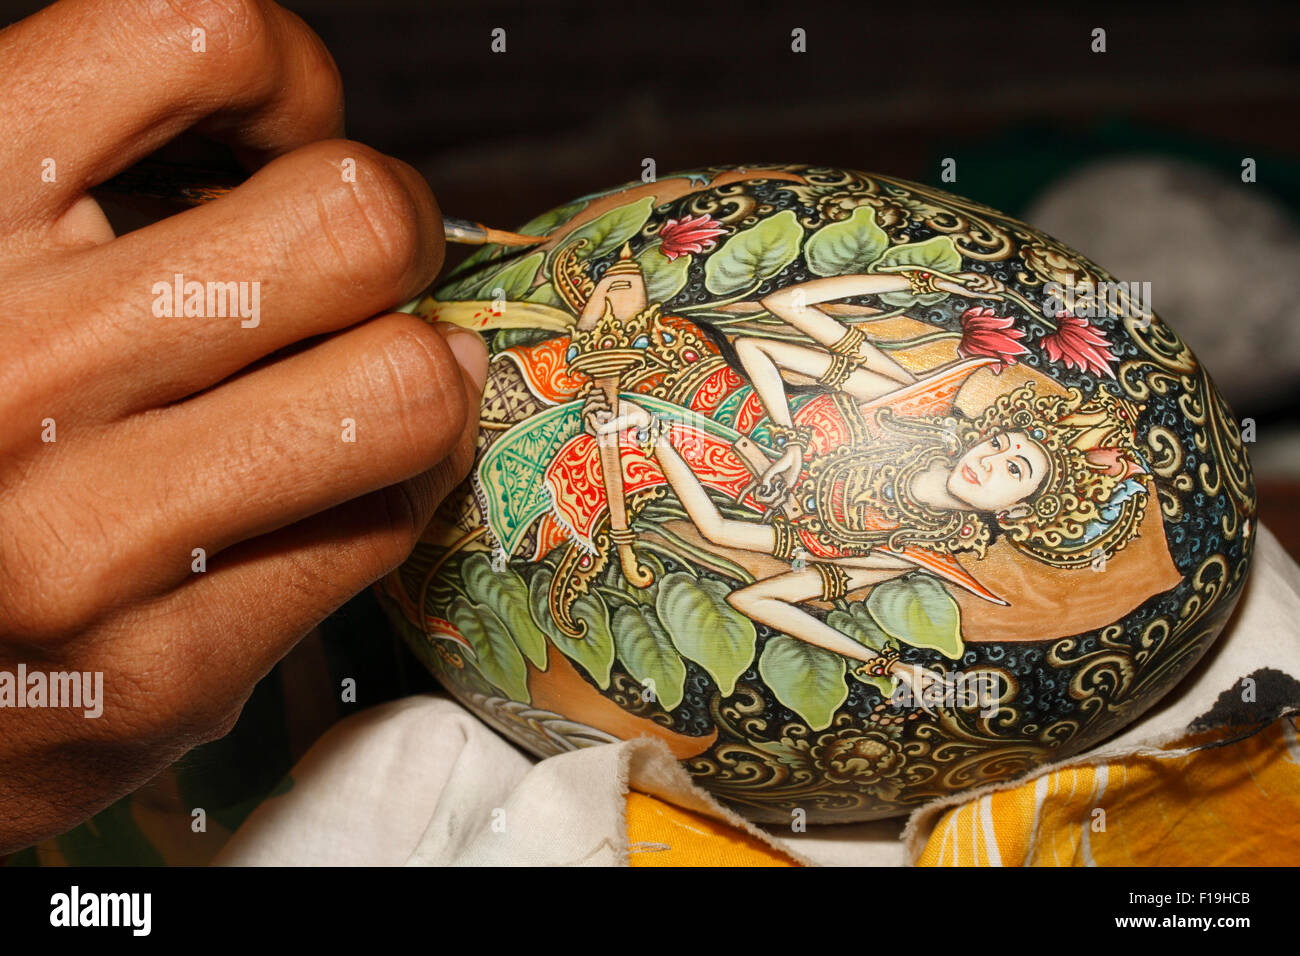 px41770-D. artist painting ostrich egg. Superb craftsmen of all kinds are to be found in the Ubud area. Bali, Indonesia. Stock Photo